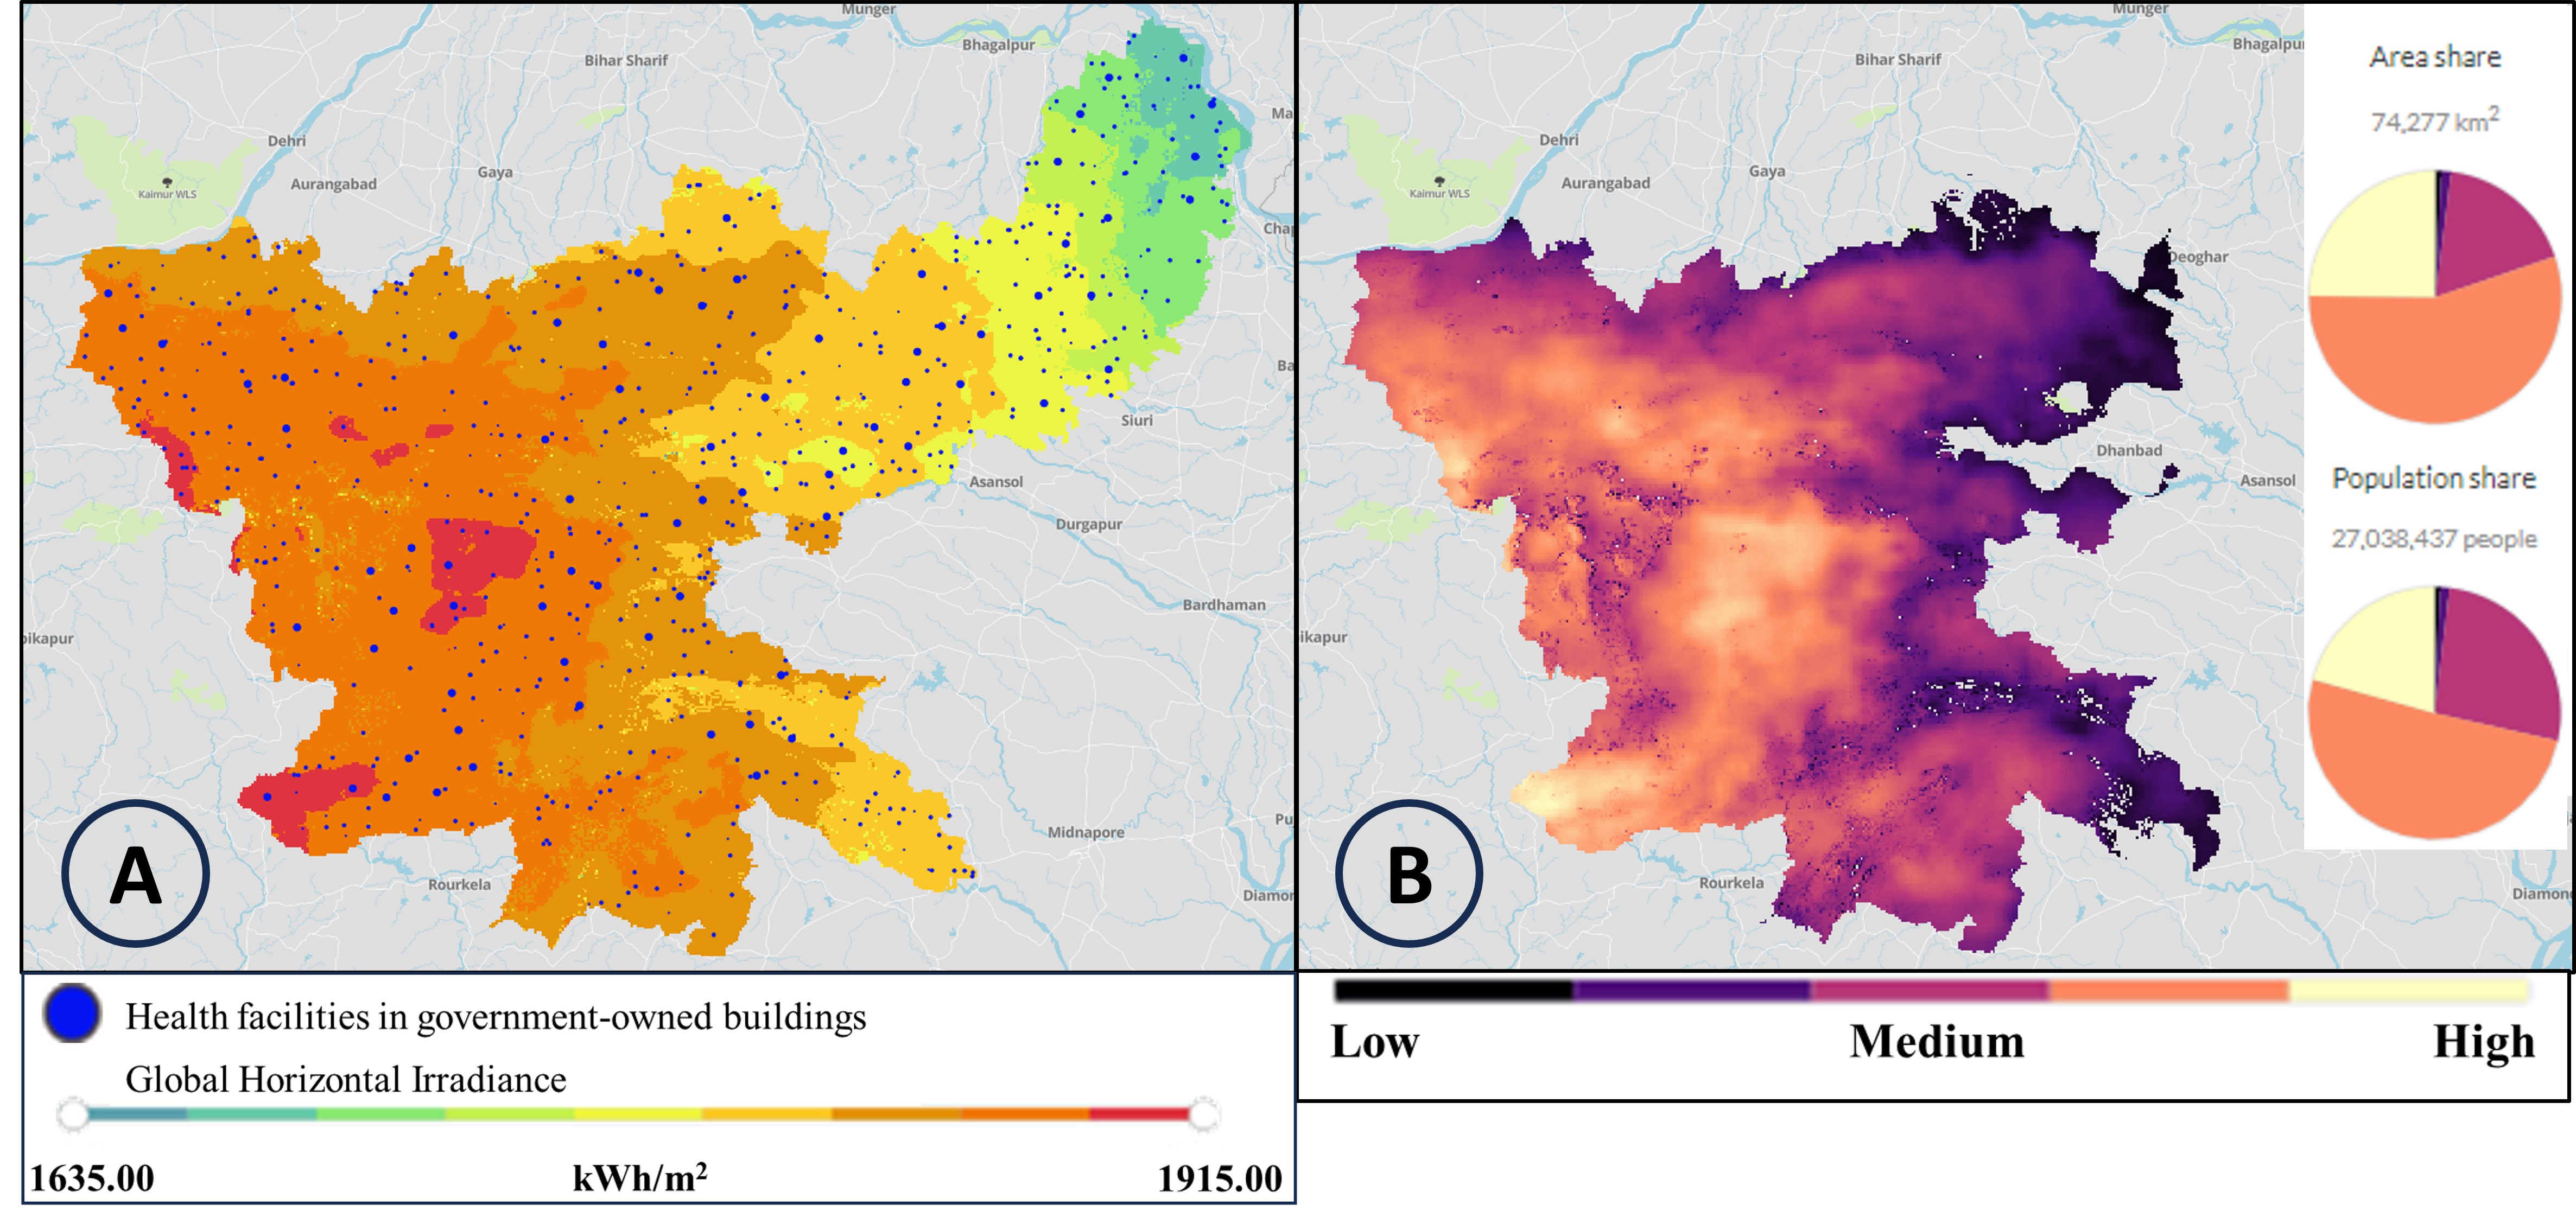 Figure 4:(A) Health facilities in government-owned buildings overlayed with GHI >1800kWh/m2 per
year; (B) Energy Access Potential (lighter color depict higher potential).